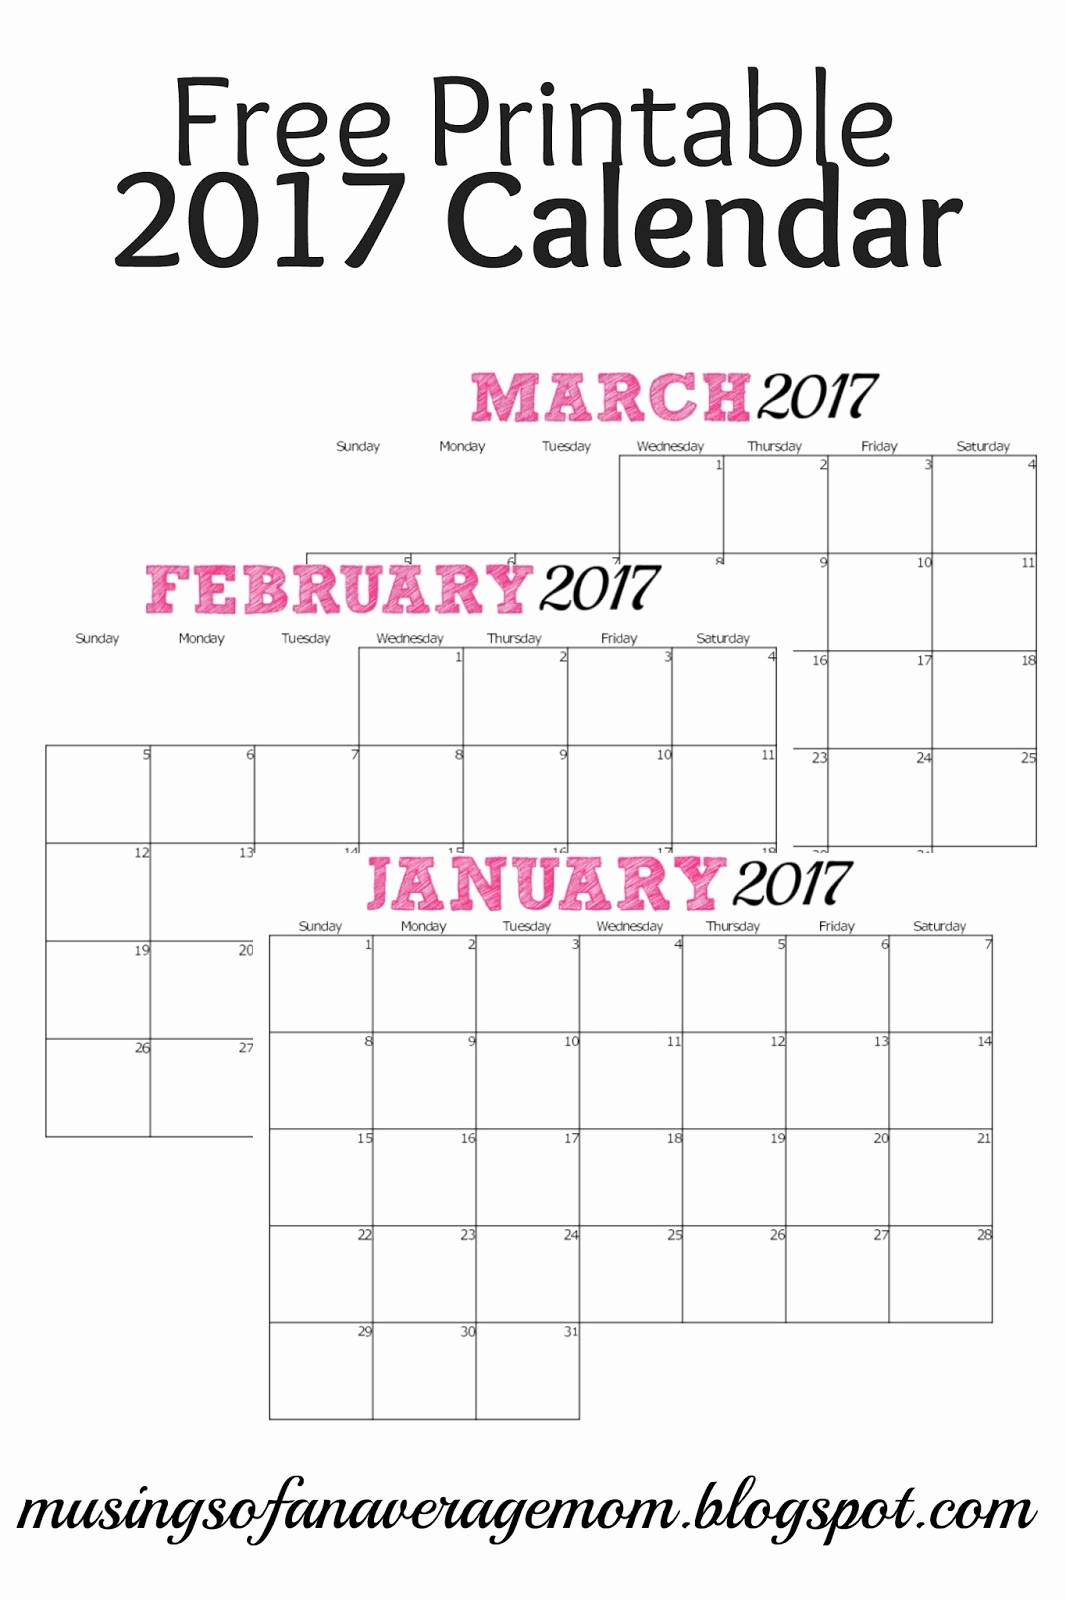 2017 Monthly Calendar Free Printable New Musings Of An Average Mom 2017 Monthly Calendars